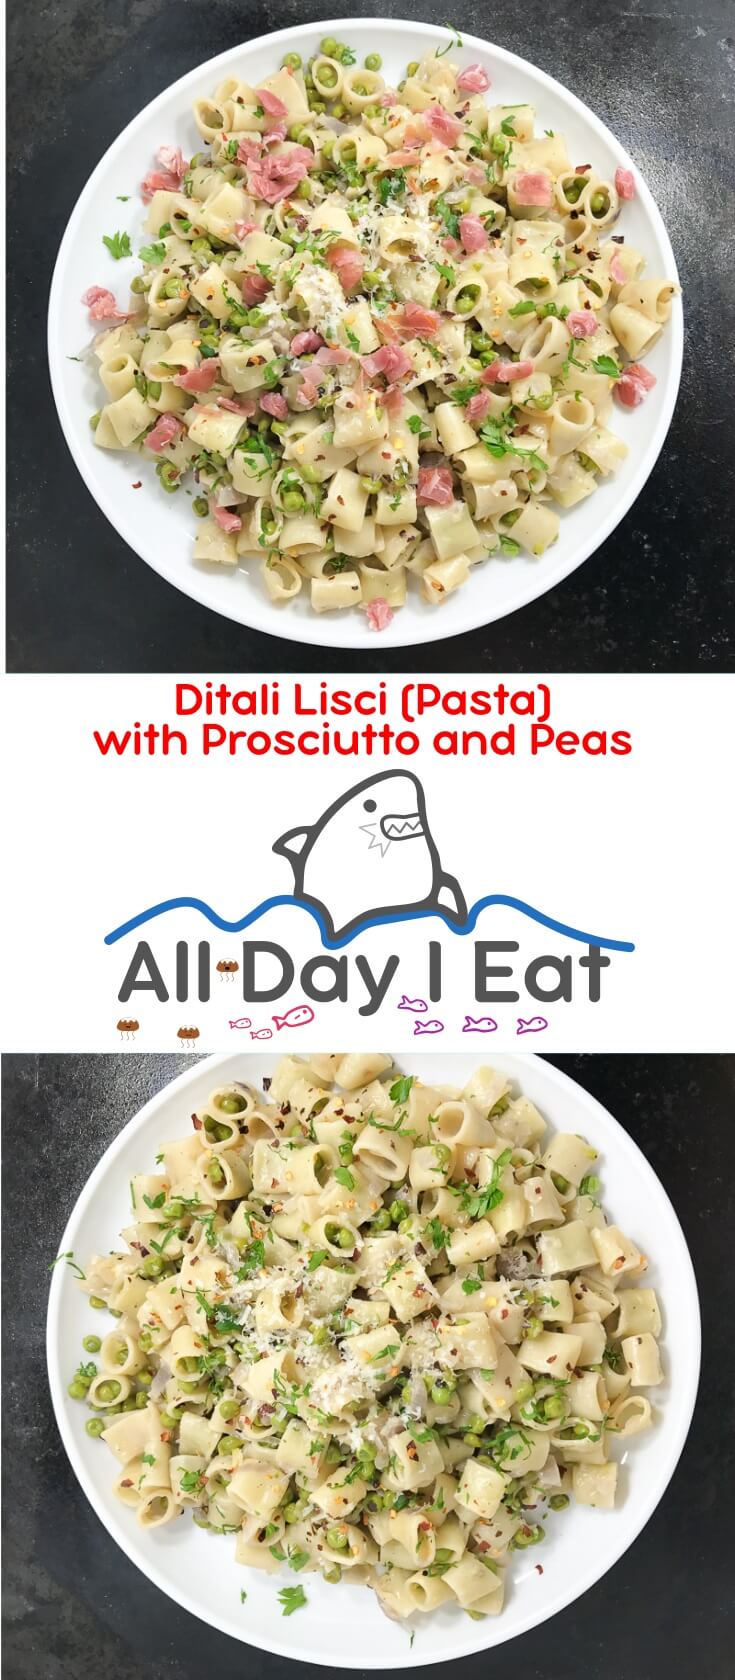 Ditali Lisci (Pasta) with Prosciutto and Peas is a delicious one pot meal made with trio of best friends: peas, prosciutto, and pasta. The peas bring a little bit of protein and fiber that offsets the carbohydrates from the pasta. And the prosciutto adds a nice sharp savory flavor, which is enhanced with additional cheese, red pepper, and parsley. Mmm mmm mmm!